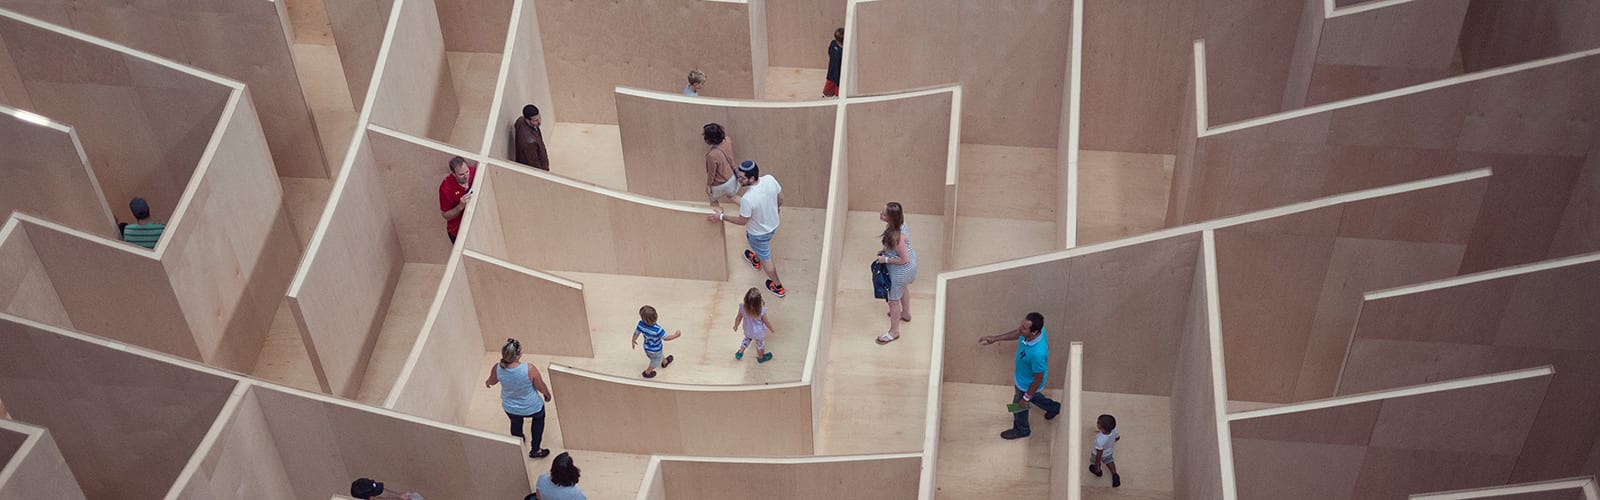 Human sized wooden maze with people of different ages walking through.